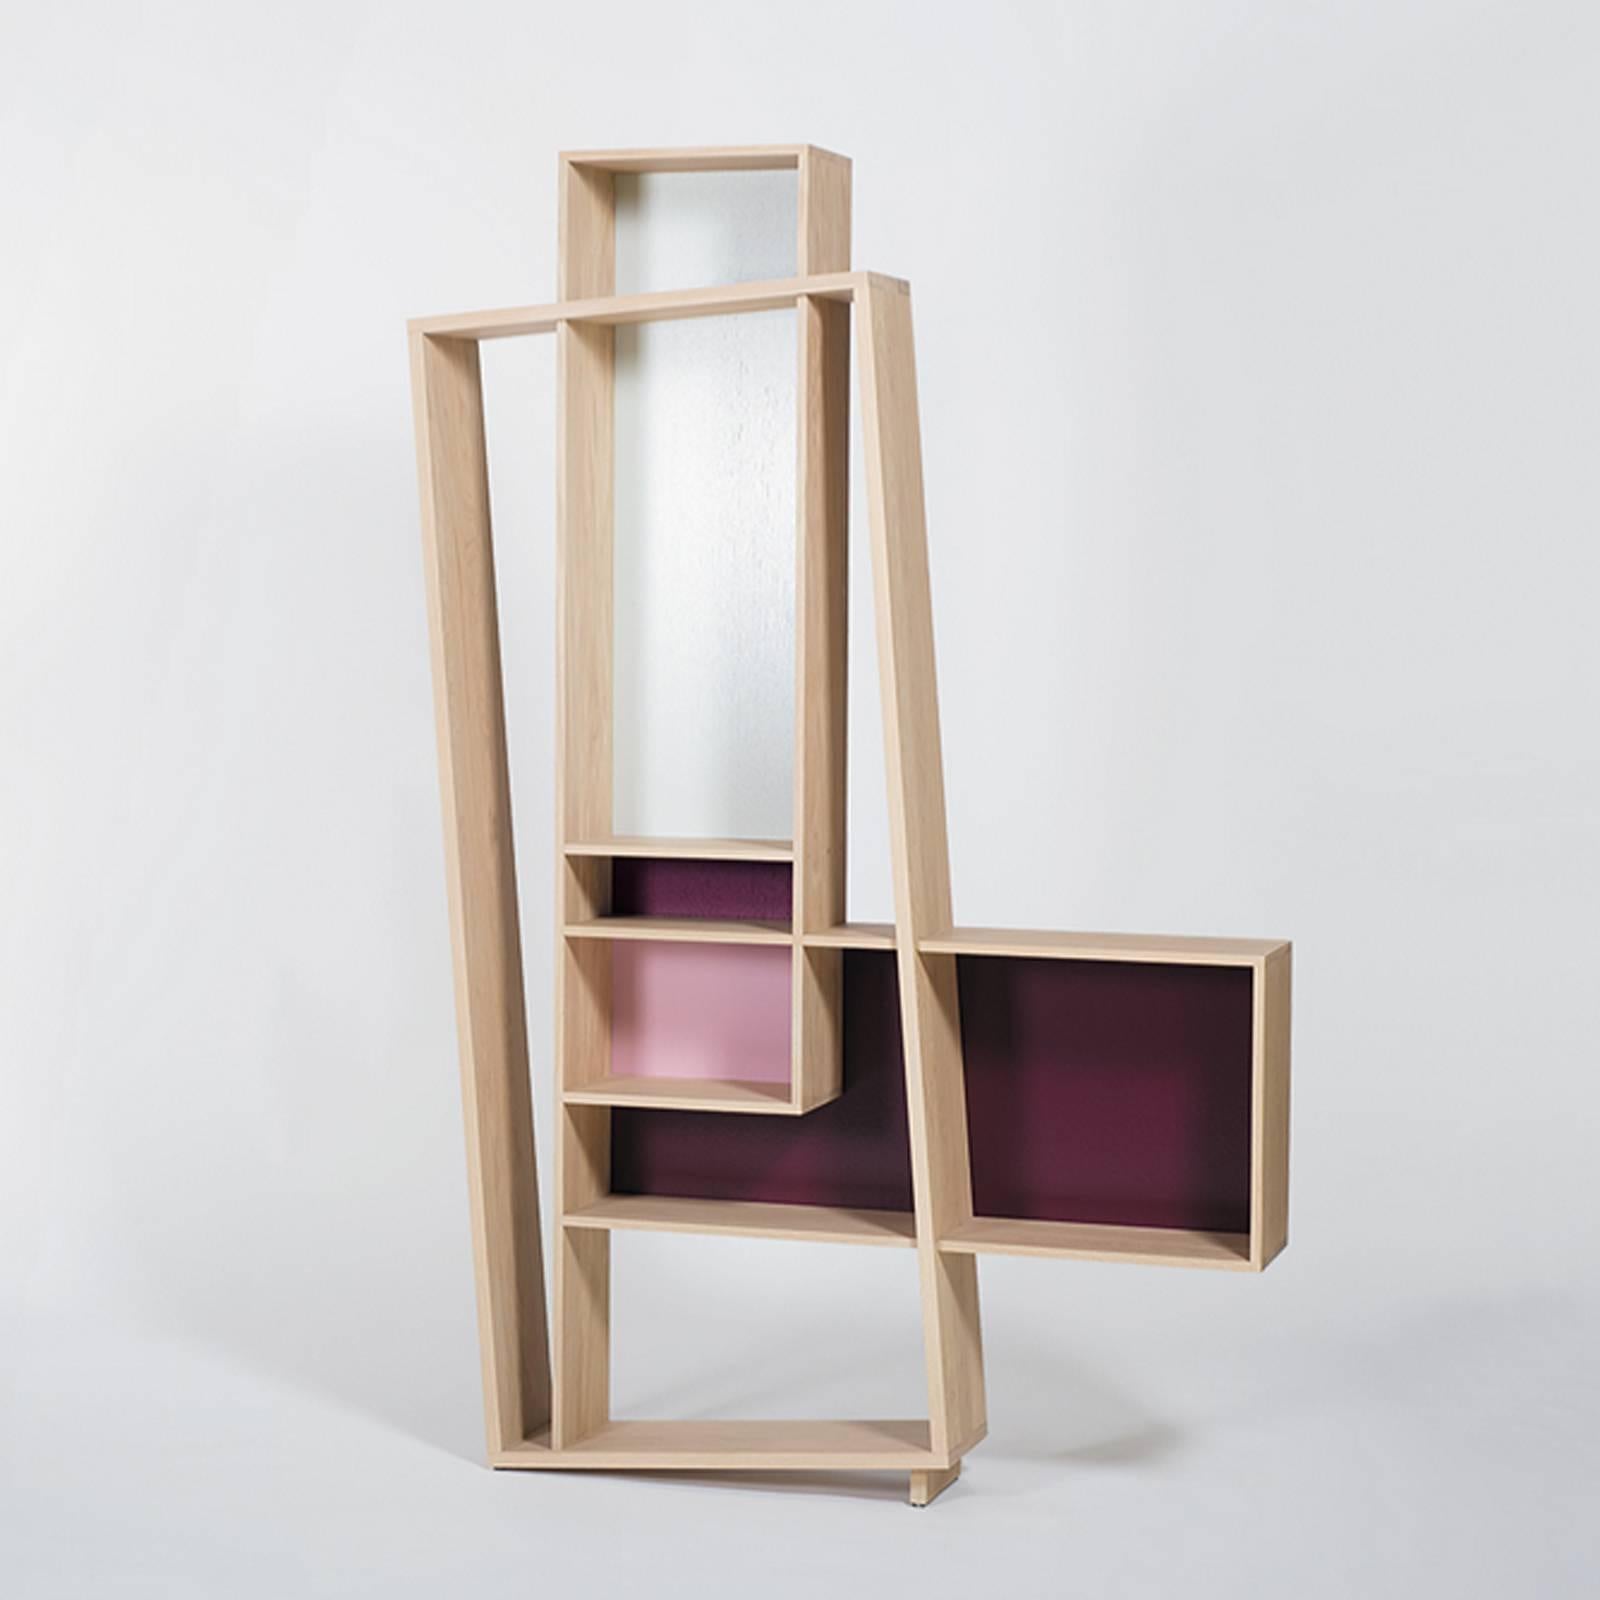 Shelve tilted wall 100% solid French raw oak, from sustainable
forests, France. With white, pink and purple backs. 
Back colors can be selected in different colors, on 
request. From Anjou in France.
Available in raw oak, price: 2950,00€
Available